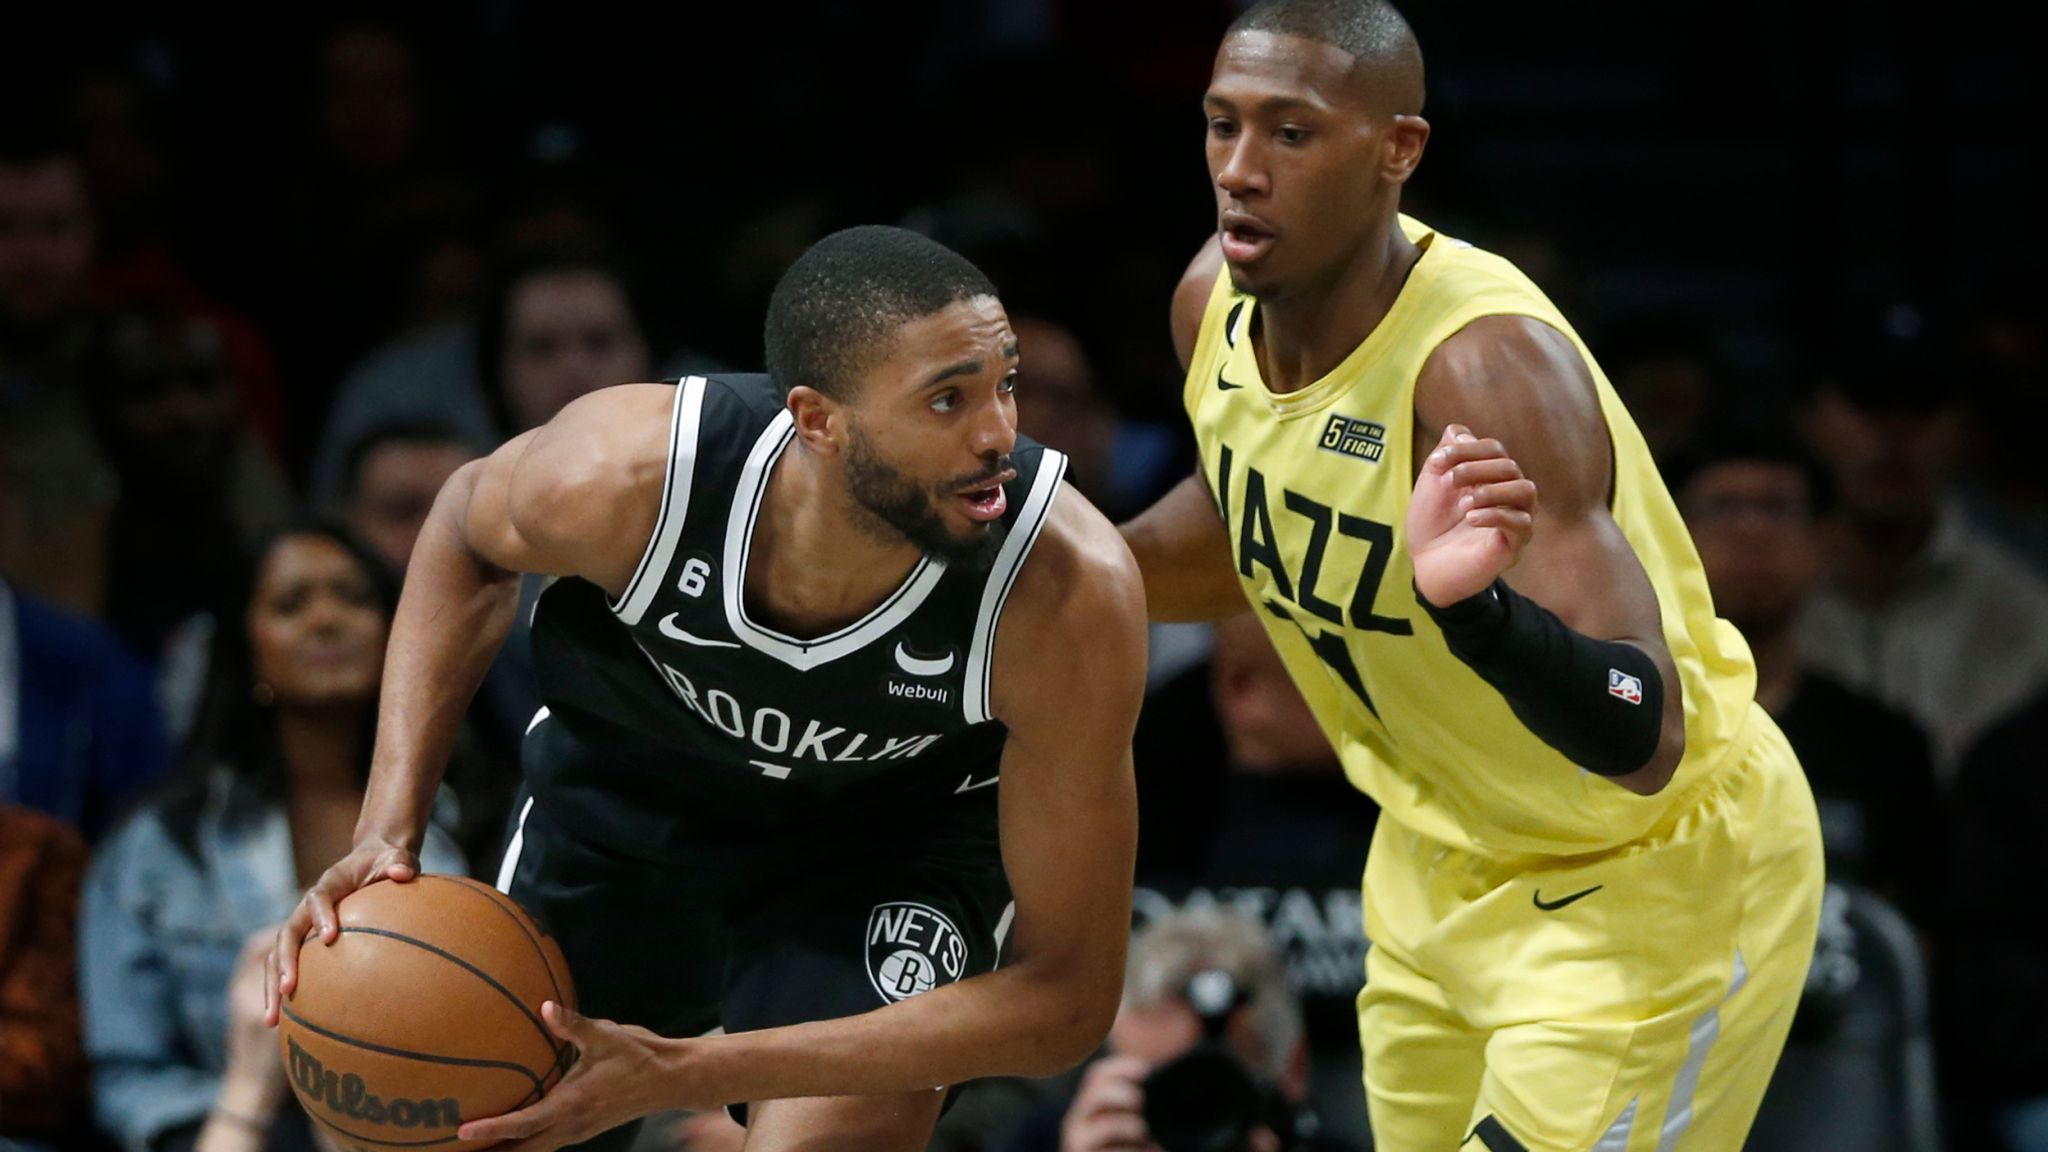 Kyrie Irving helps Nets beat Knicks after blowing big lead